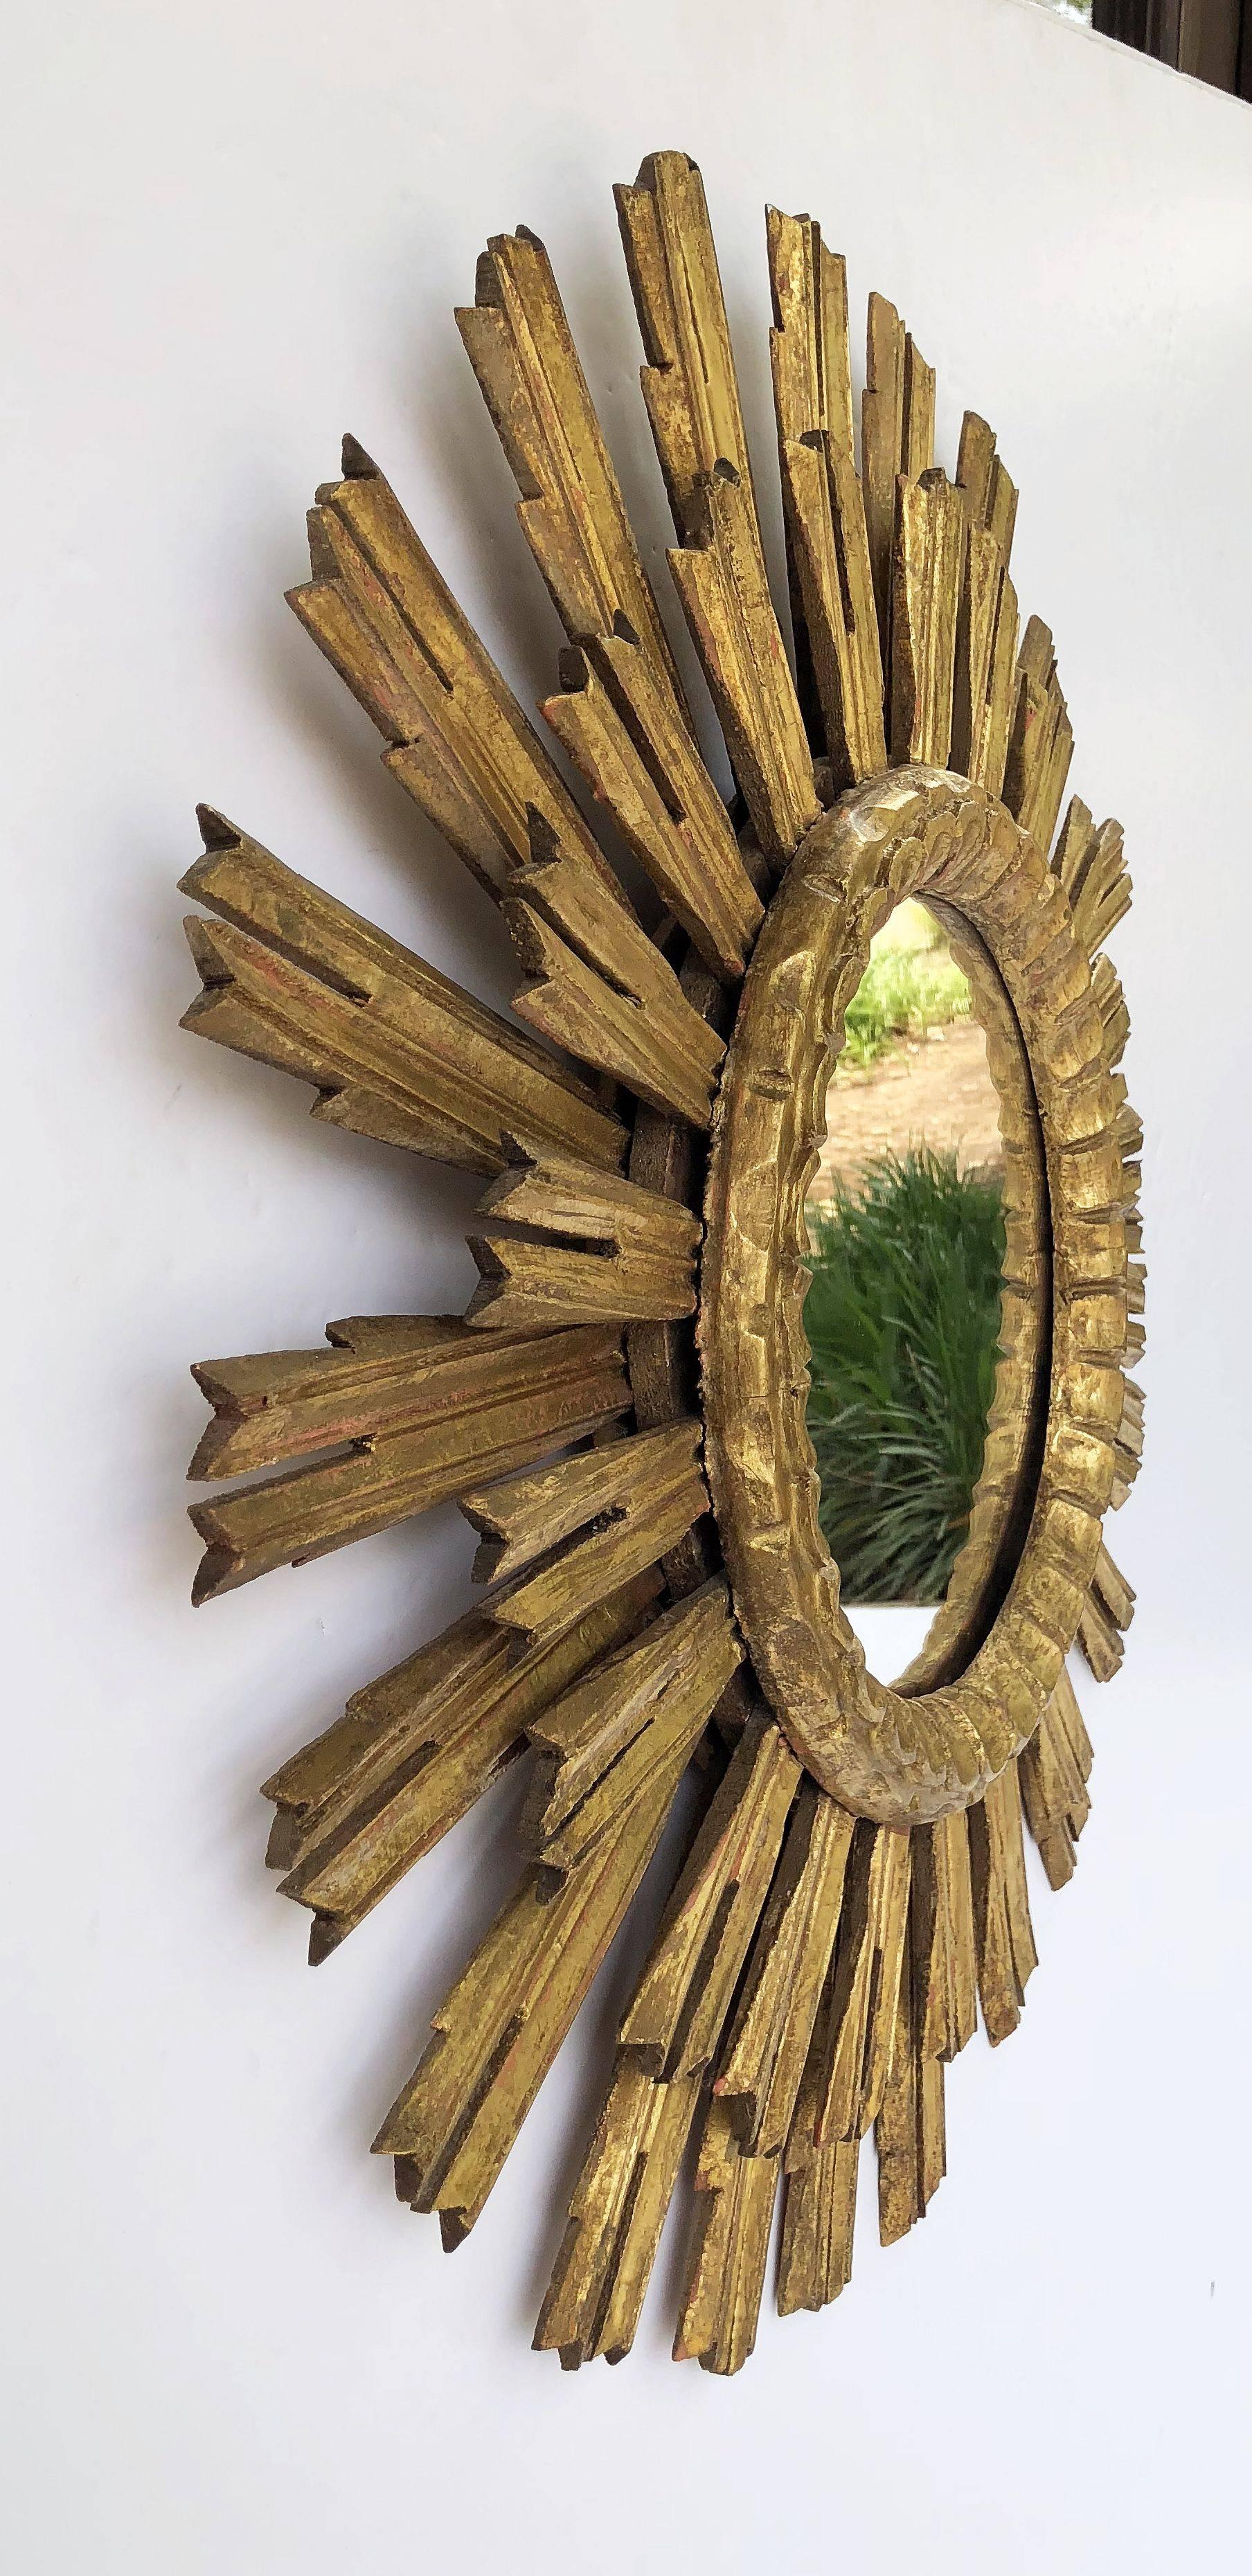 A lovely French gilt sunburst (or starburst) mirror, 25 inches diameter, with round mirrored glass centre in moulded frame.